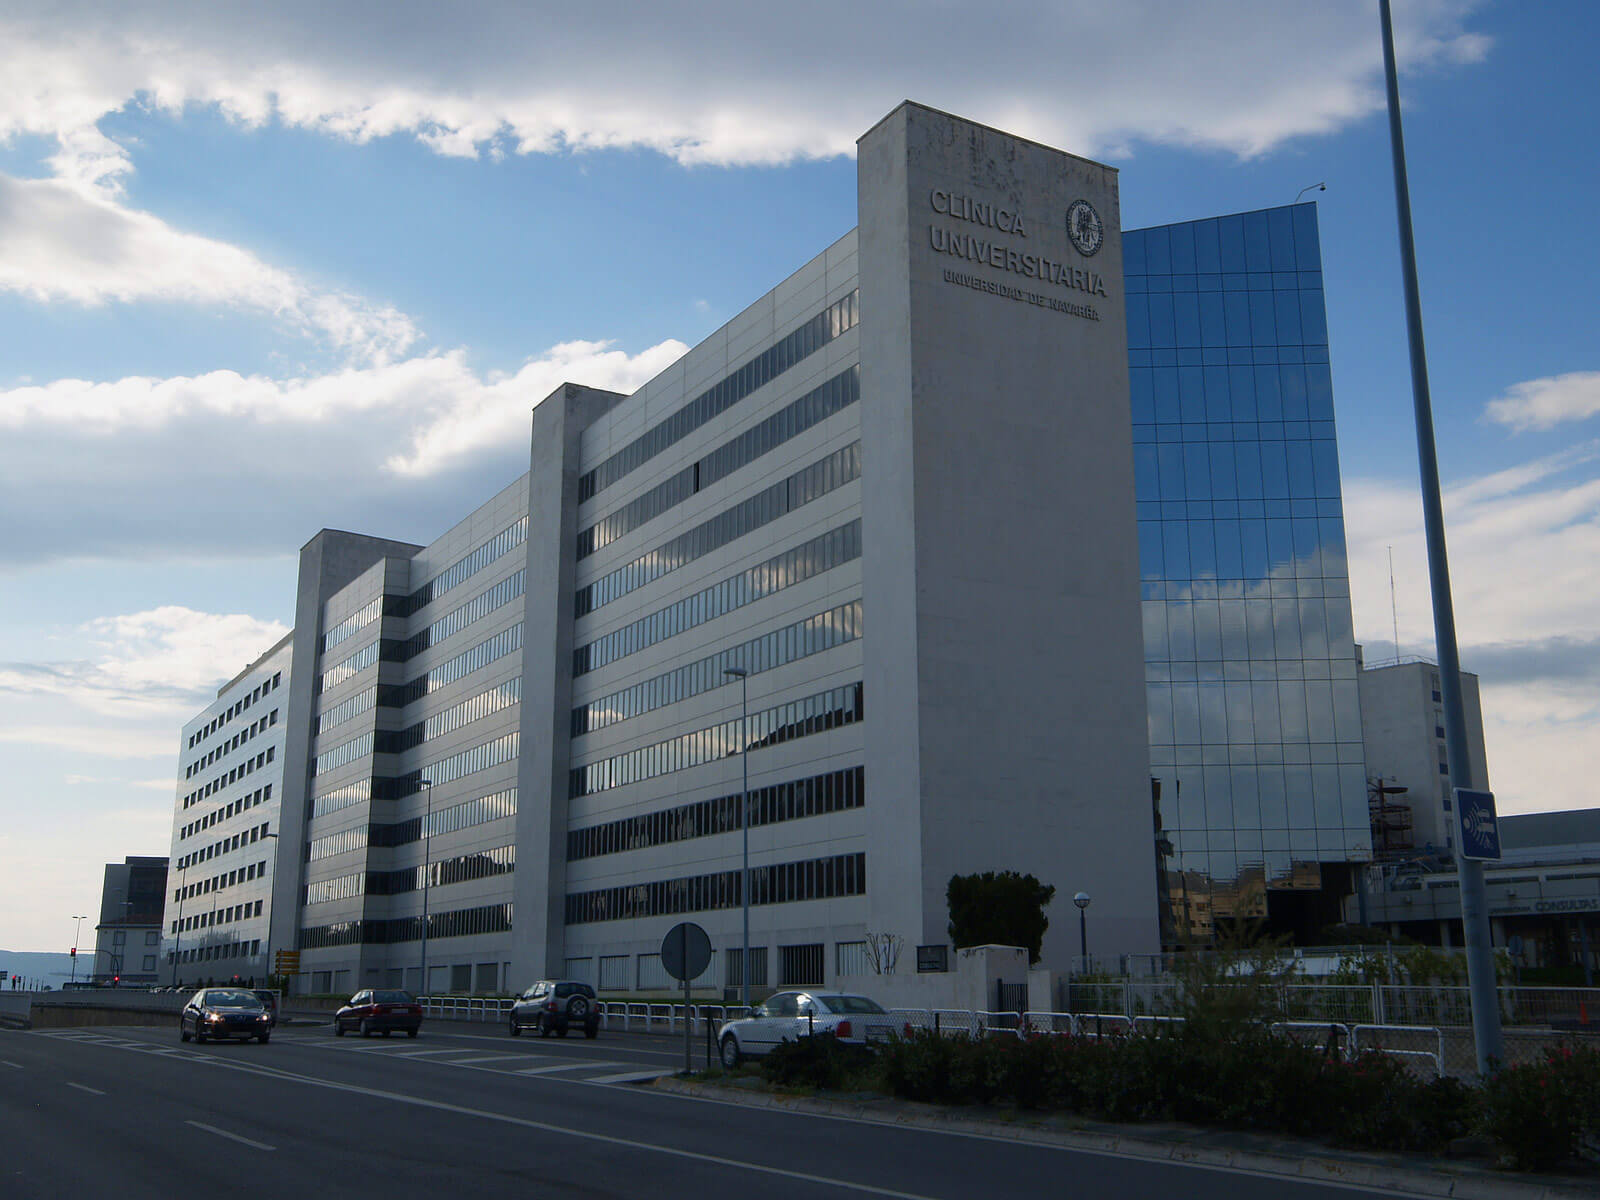 In the ranking of private hospitals, the Clínica Universidad de Navarra repeats its first position